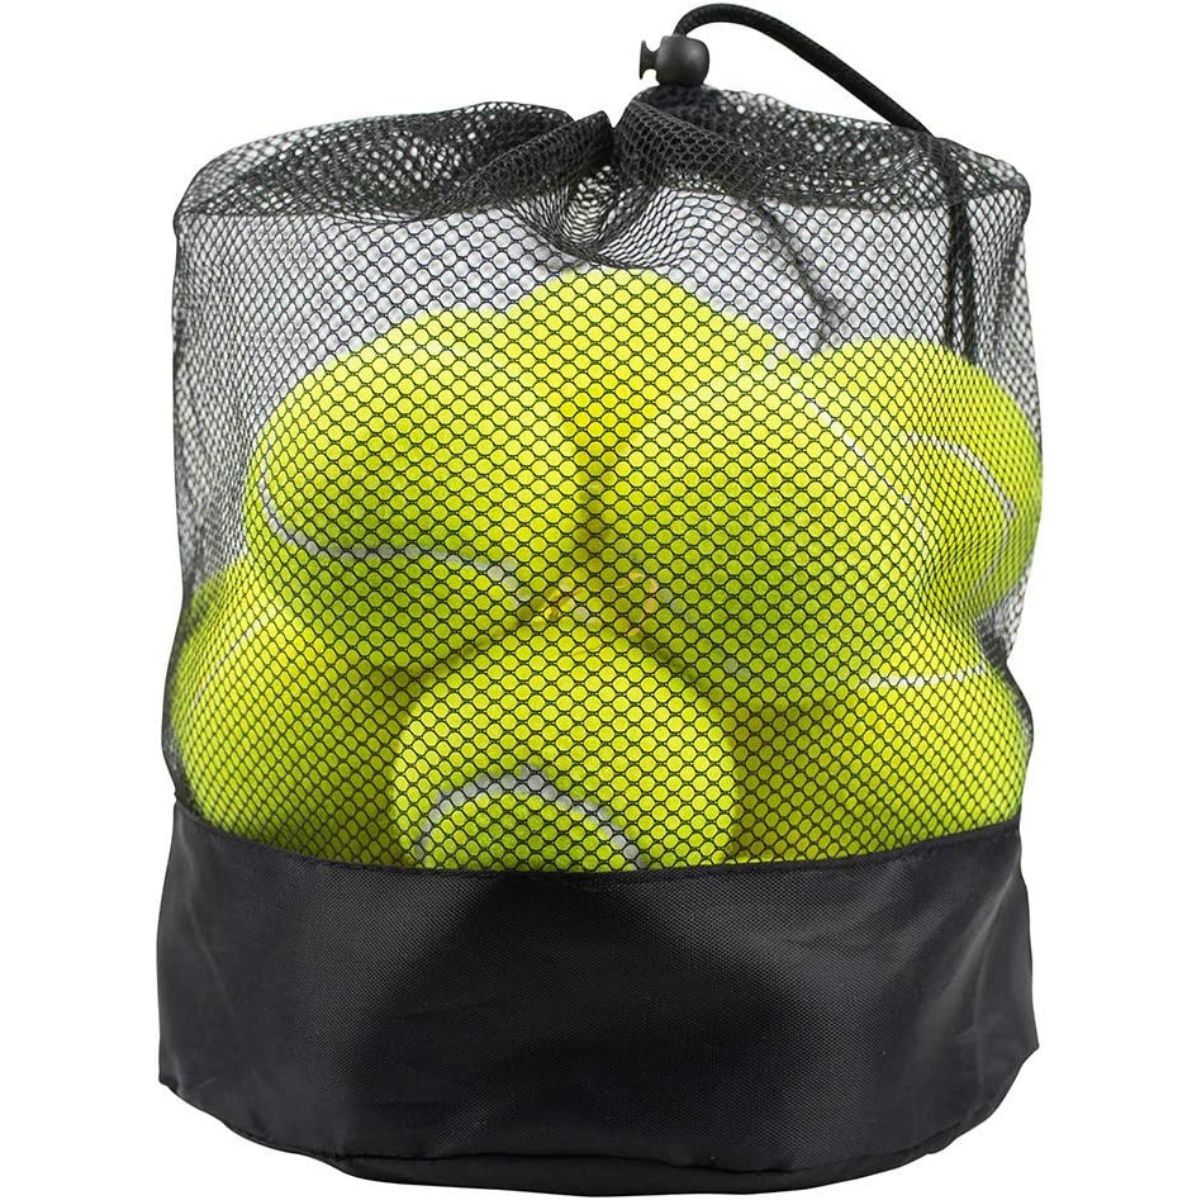 The Best Tennis Balls for Practice Options: Tebery Green Advanced Training Tennis Balls